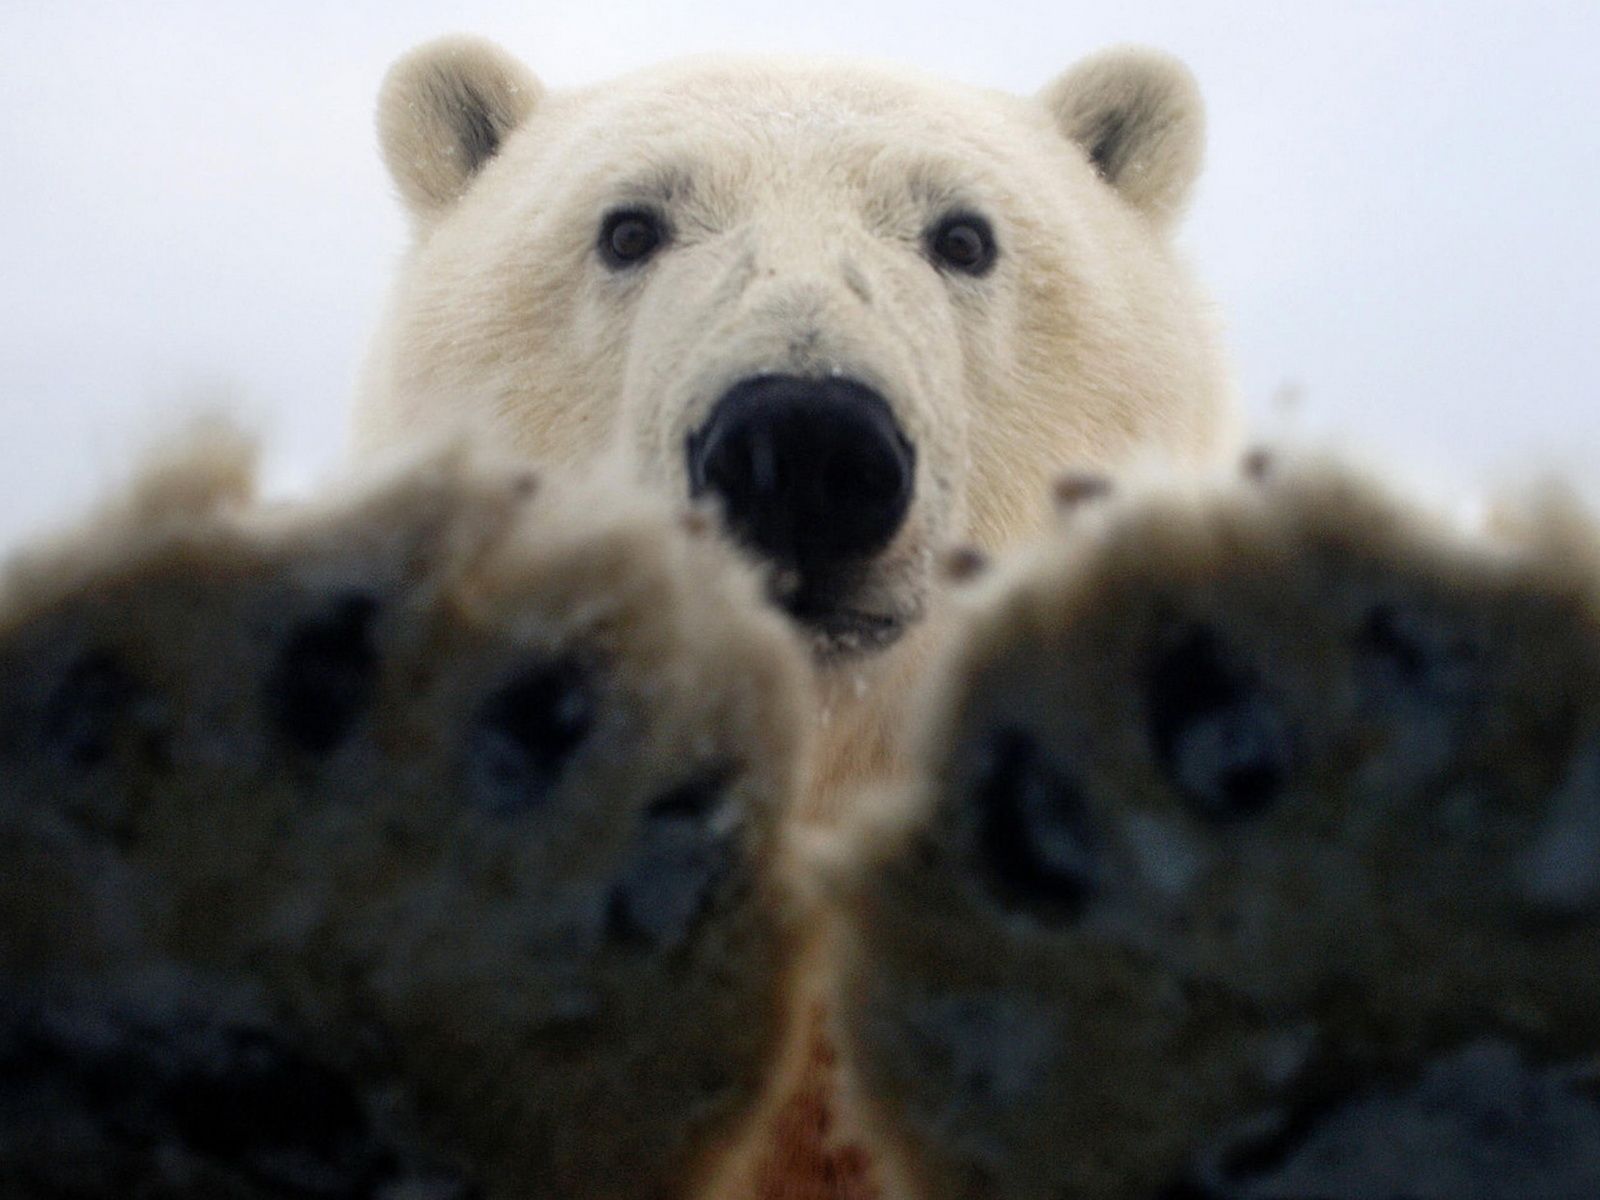 Paws of a polar bear wallpapers and images - wallpapers, pictures ...